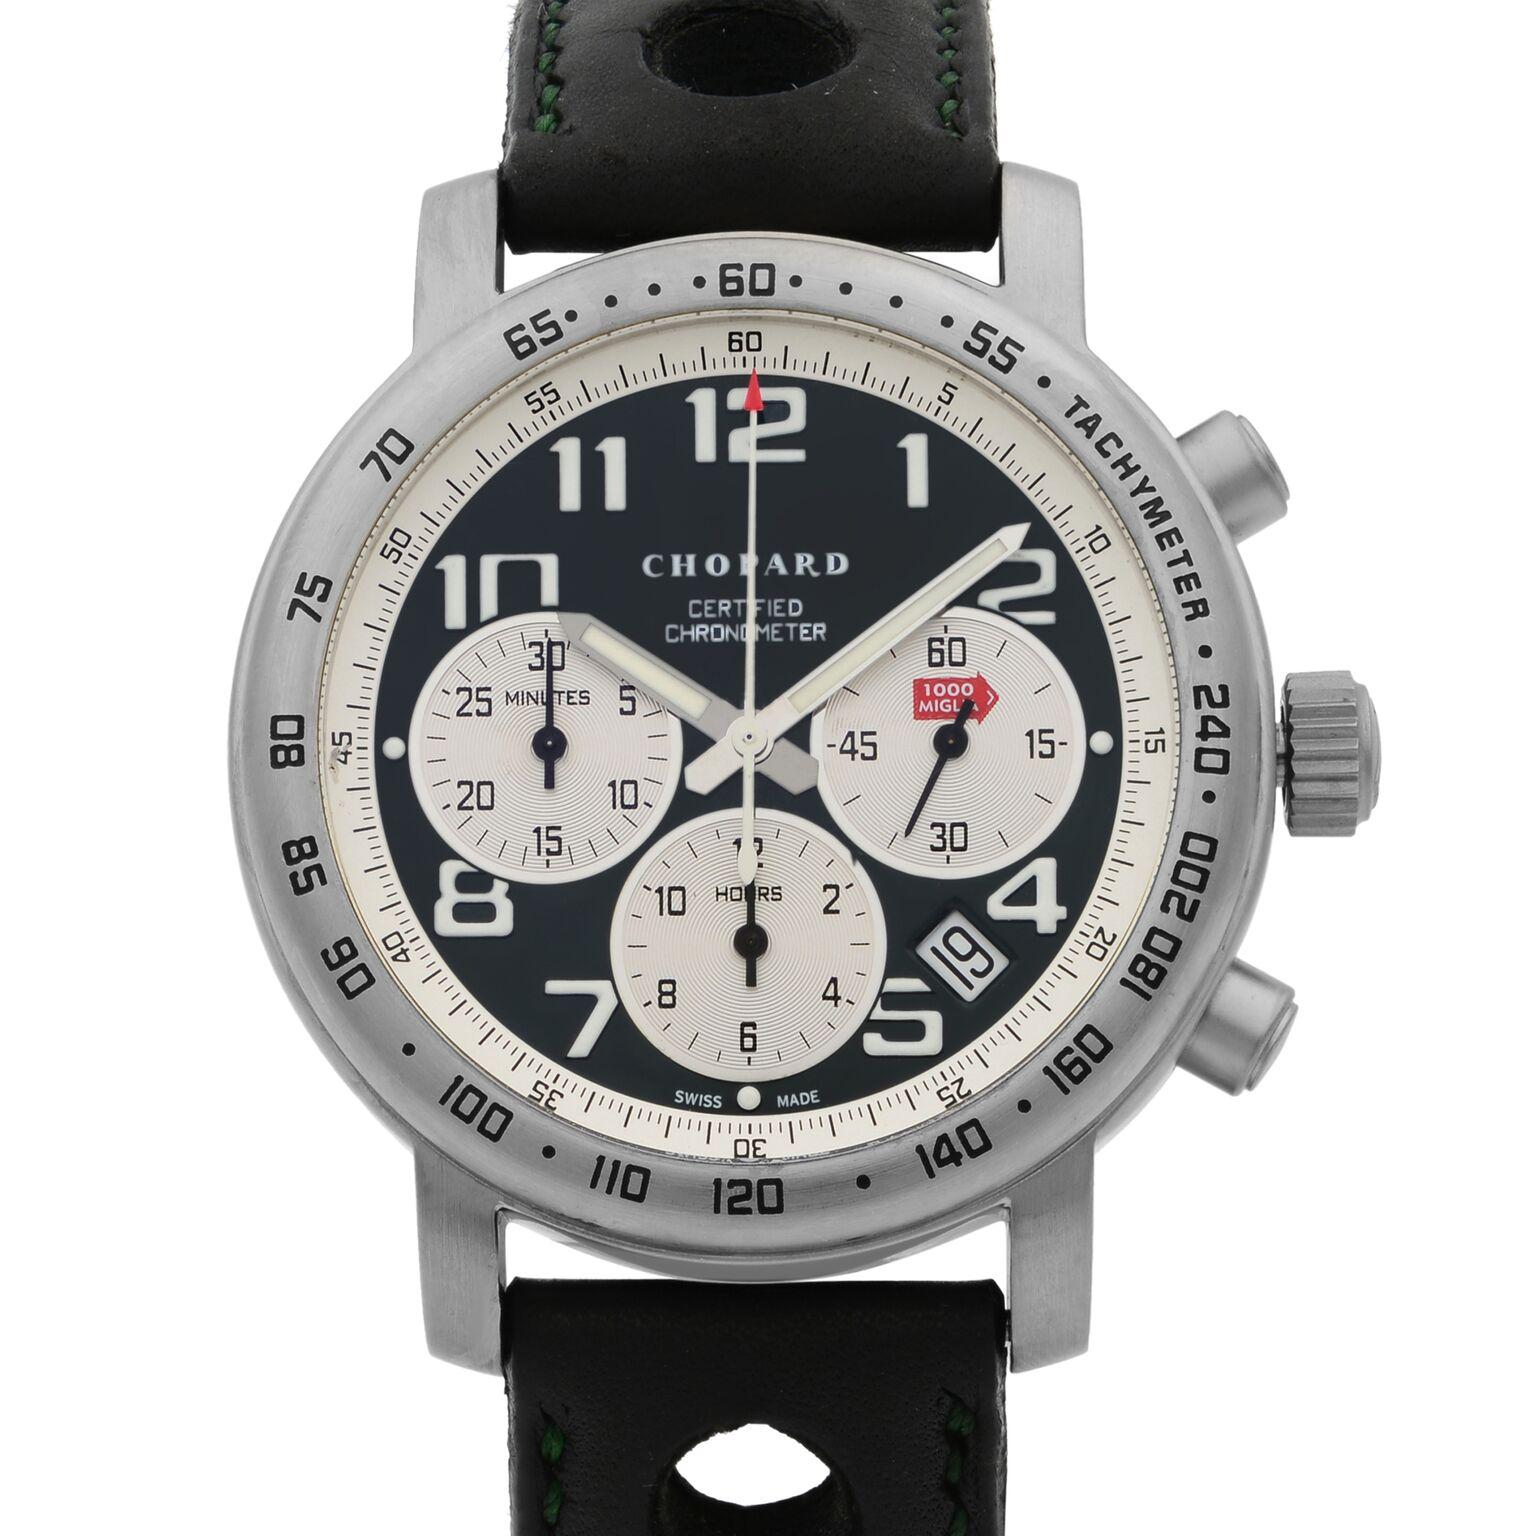 This pre-owned Chopard Mile Miglia 16/8915-102 is a beautiful men's timepiece that is powered by mechanical (automatic) movement which is cased in a titanium case. It has a round shape face, chronograph, date indicator, small seconds subdial,